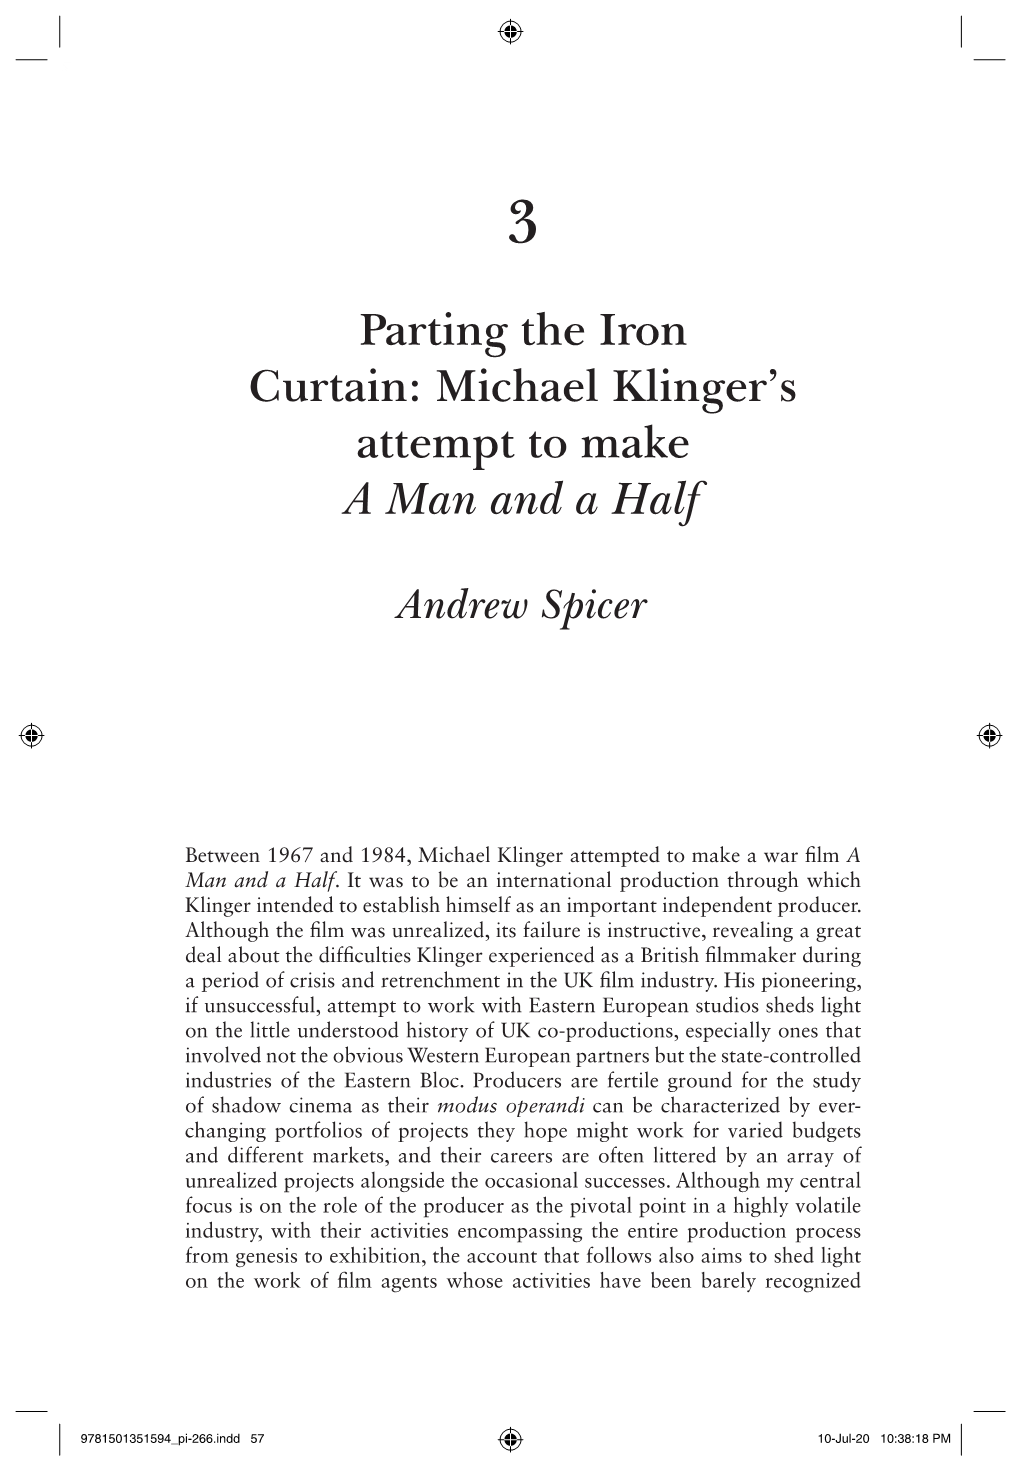 Parting the Iron Curtain: Michael Klinger's Attempt to Make a Man